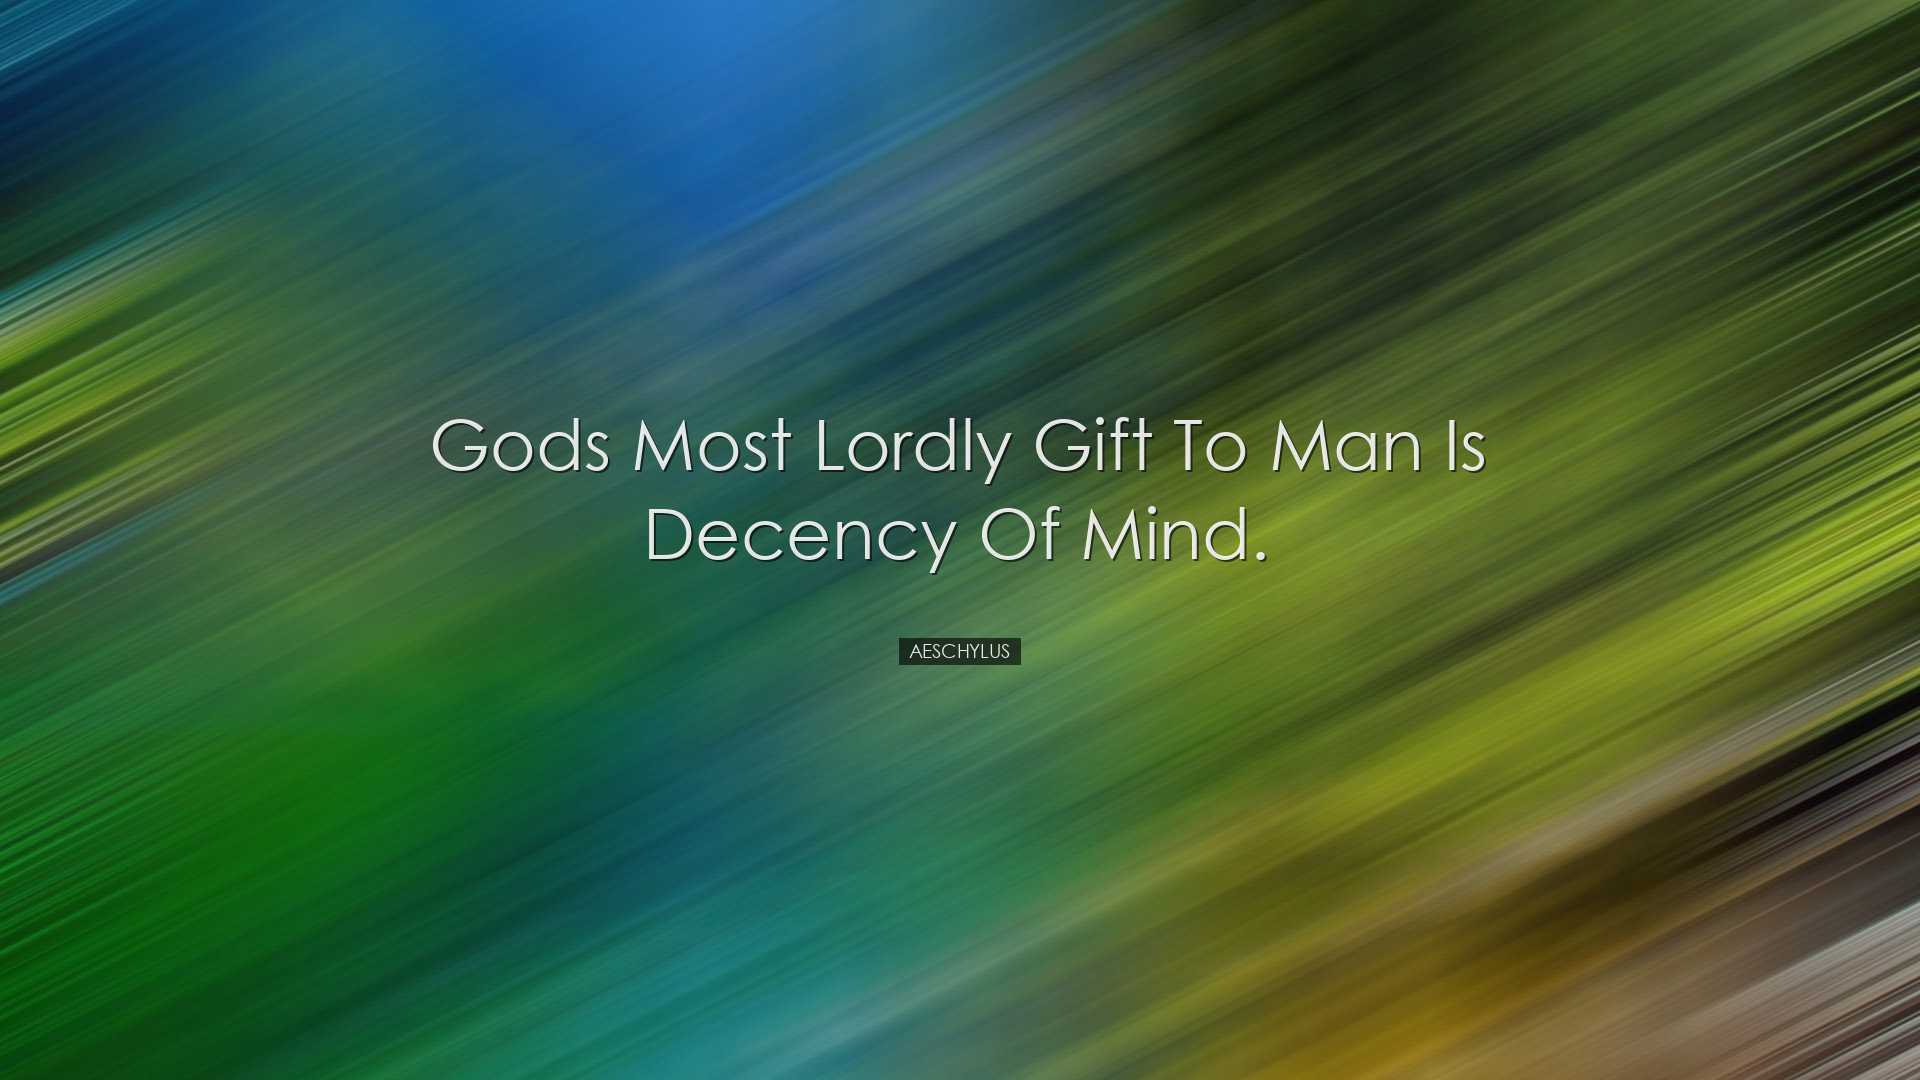 Gods most lordly gift to man is decency of mind. - Aeschylus